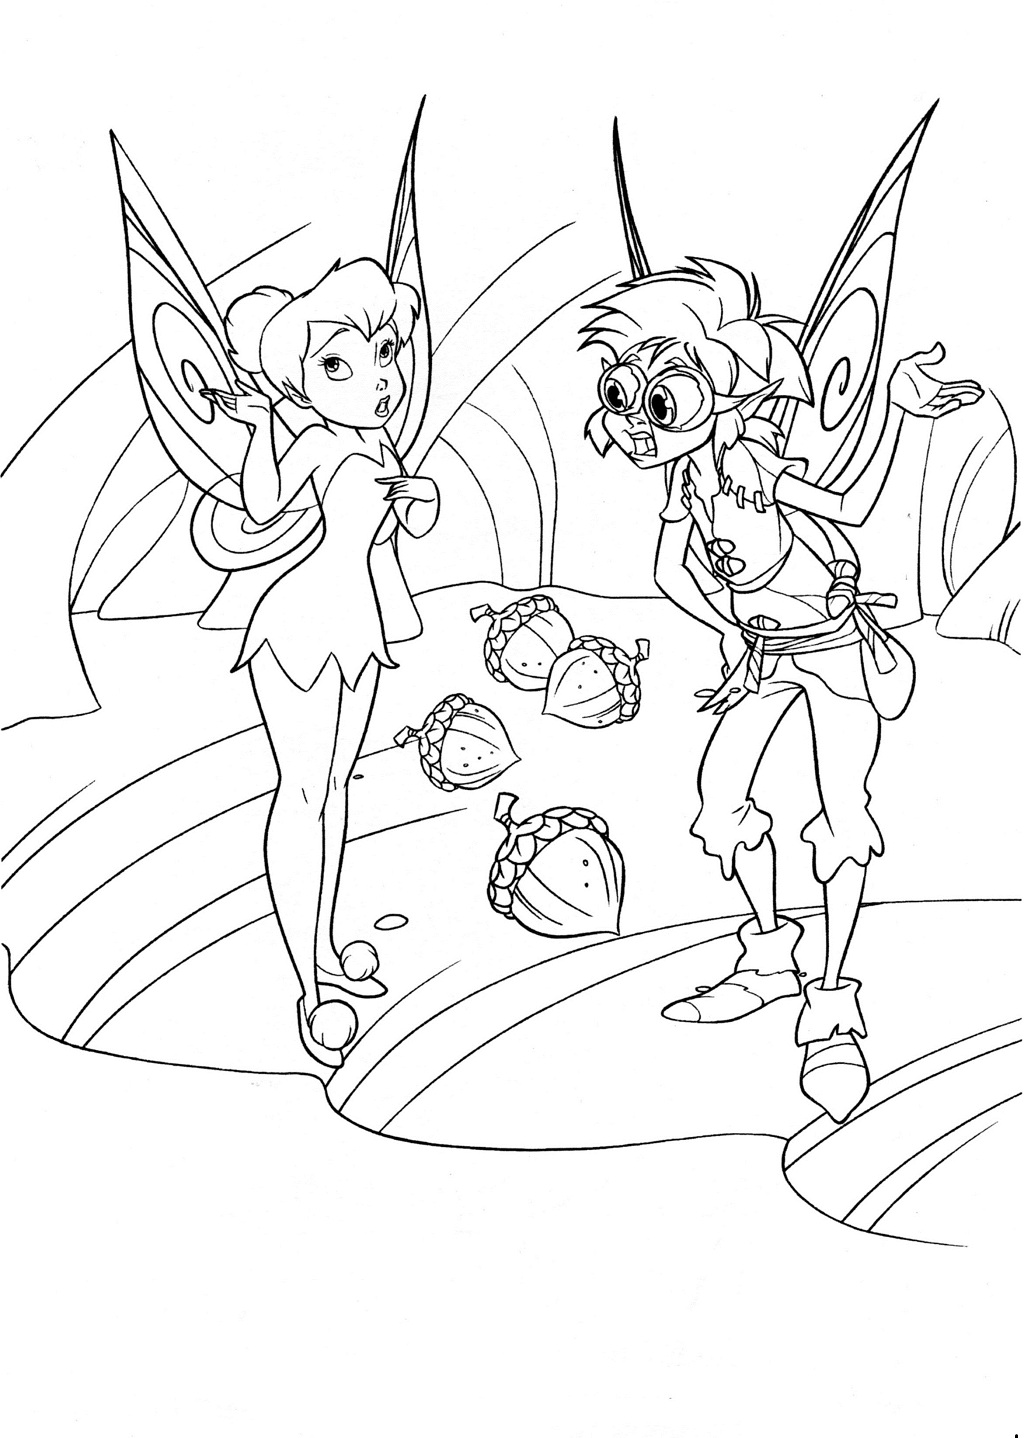 Tinker Bell coloring pages to download and print for free